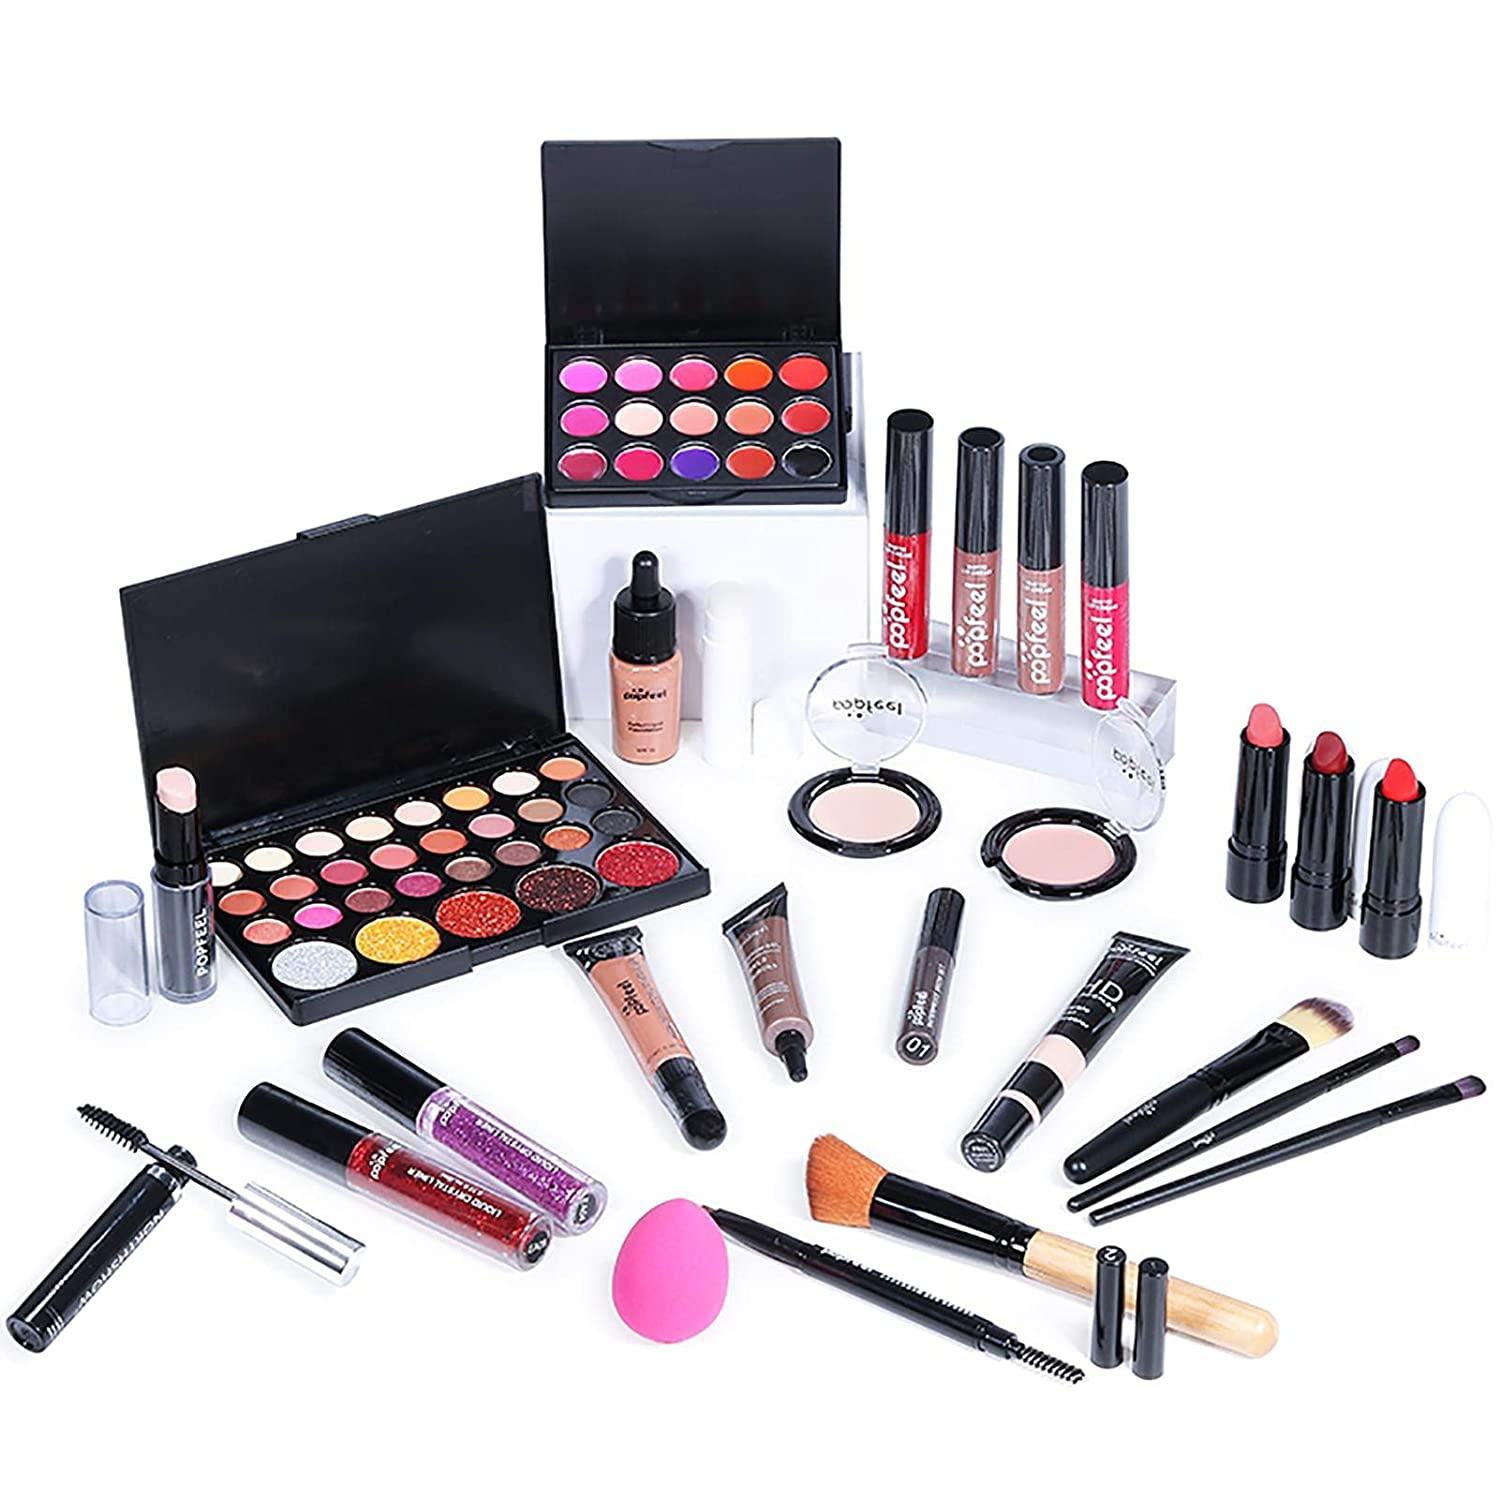 AFGSsm Kit maquillaje mujer, Set de maquillaje para adolescentes, Maletín  maquillaje profesional completo, All in One Makeup Gift Set(27 PIEZAS)